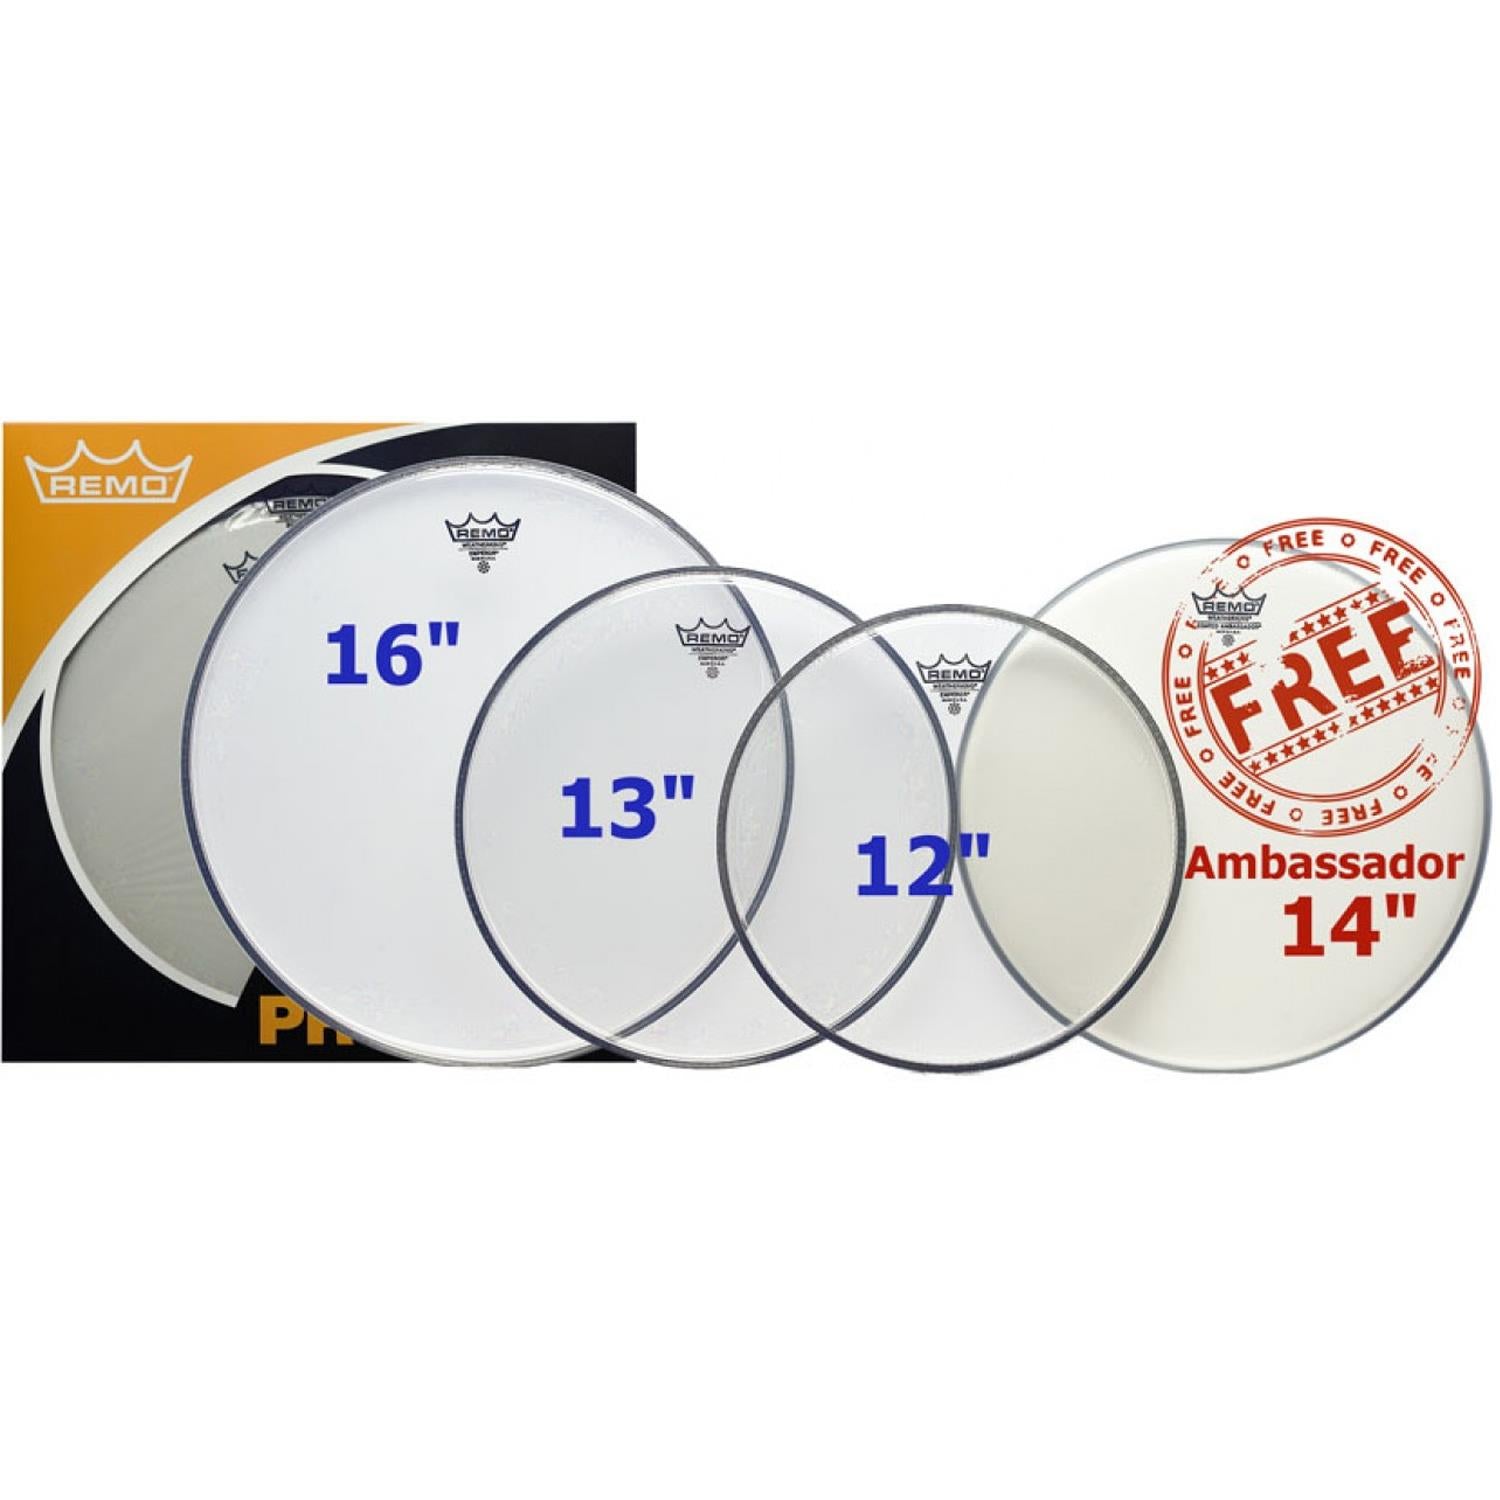 Remo PP-0250-BE Emperor Clear Rock Pro Pack Drum Heads